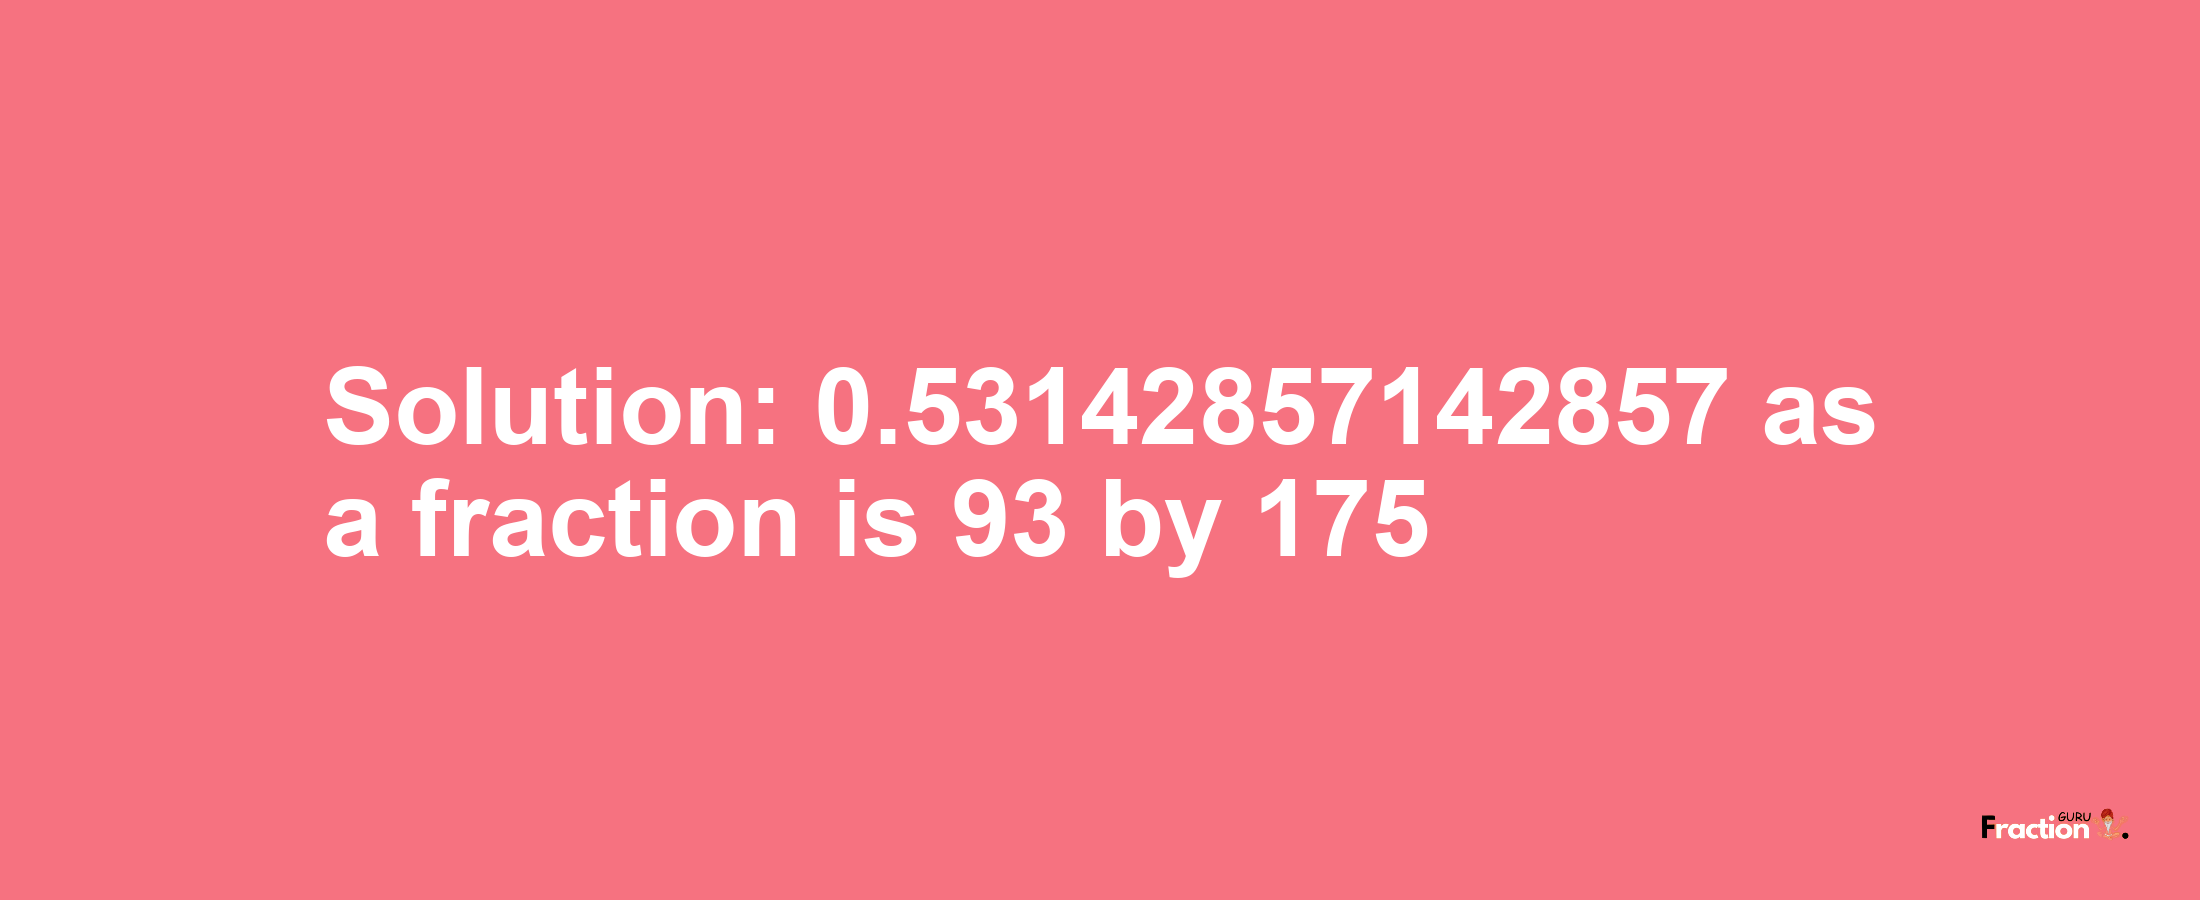 Solution:0.53142857142857 as a fraction is 93/175